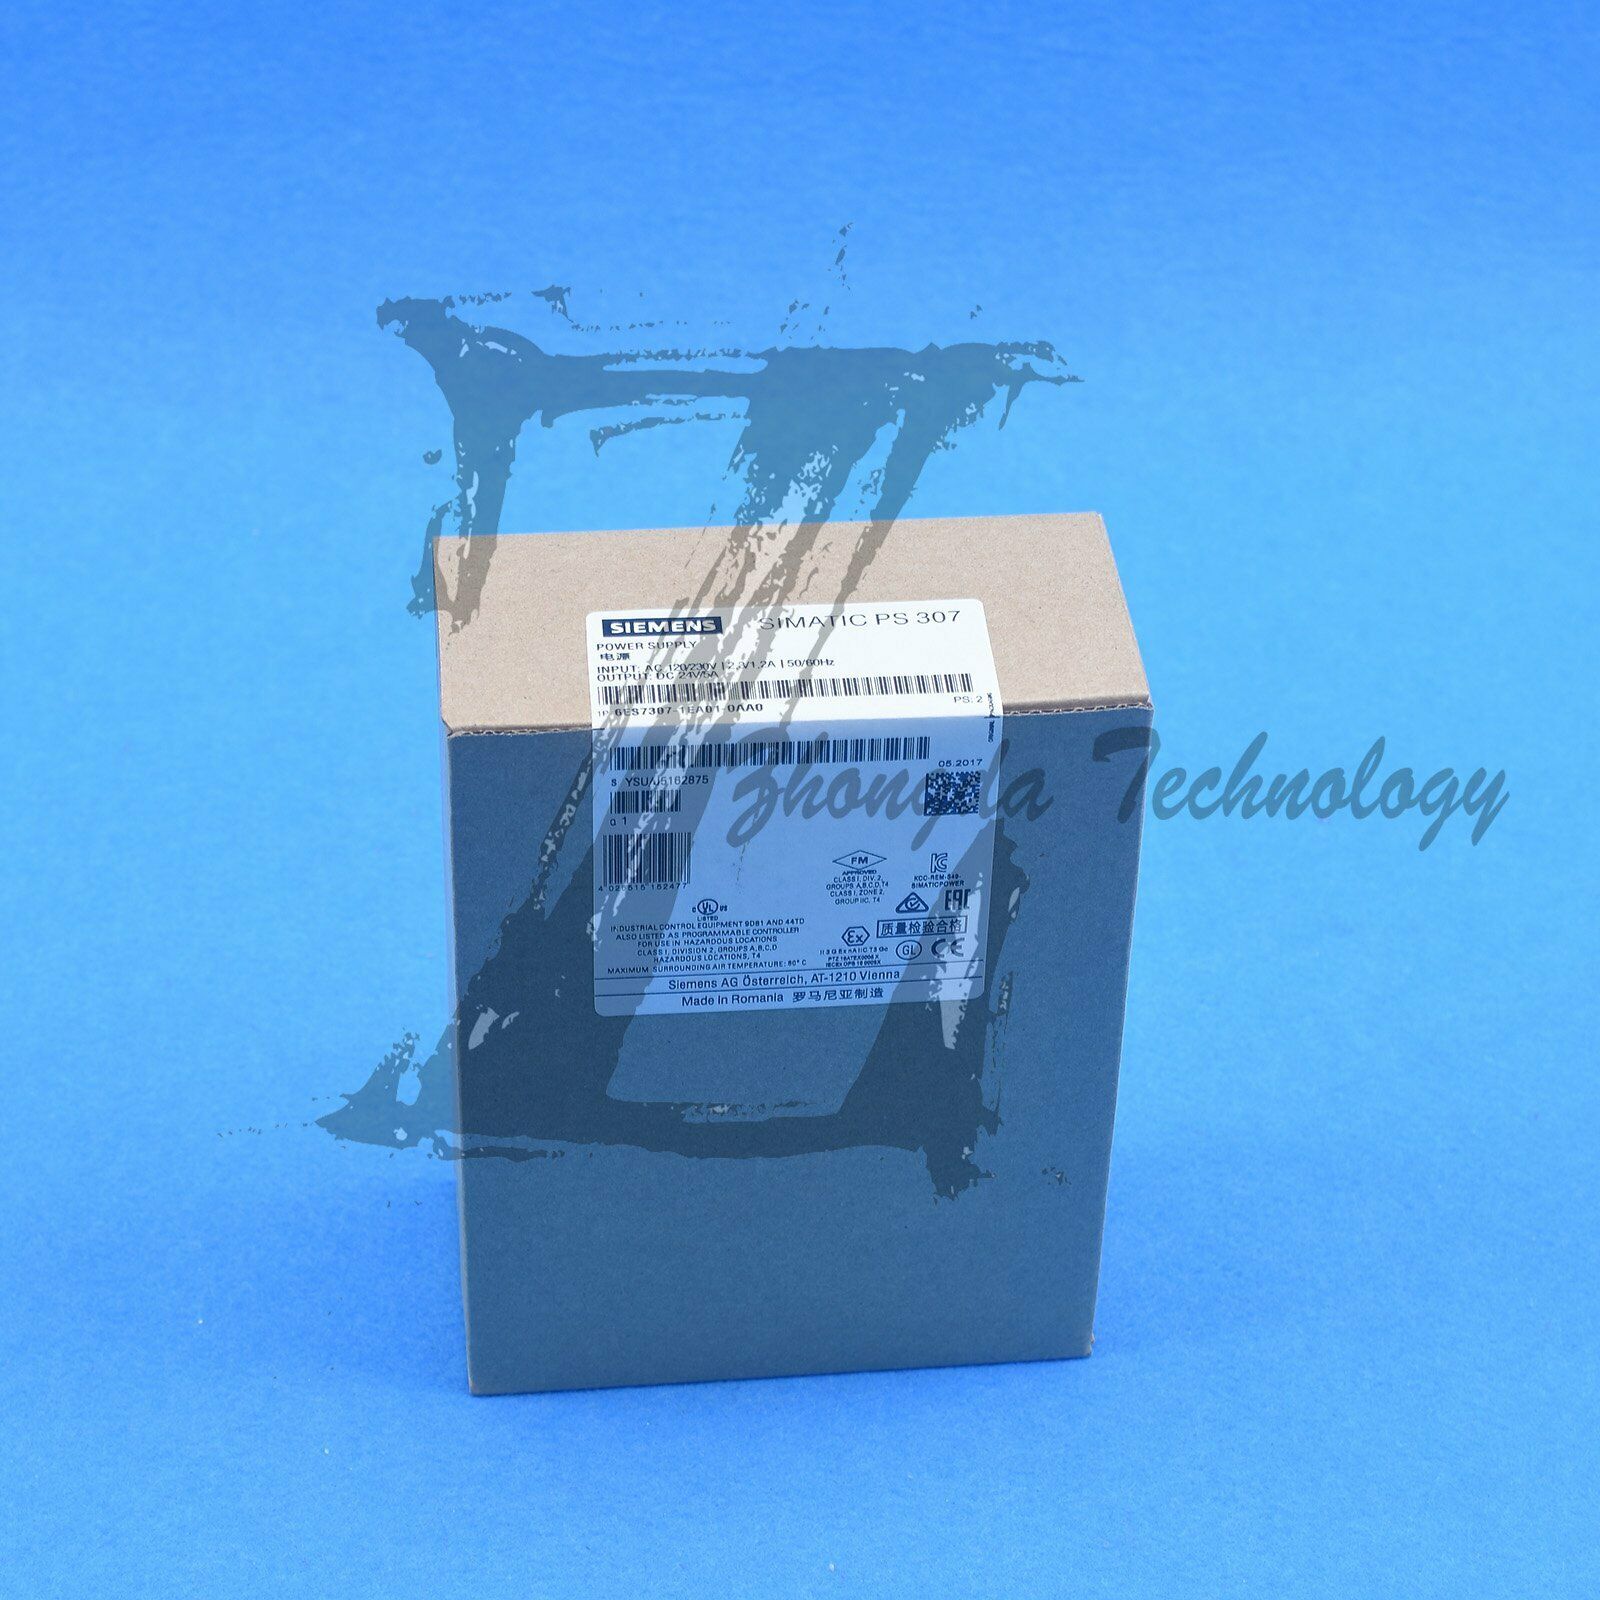 1pc new Siemens power module 6ES7307-1EA01-0AA0 fast delivery KOEED 101-200, 90%, import_2020_10_10_031751, Other, Siemens